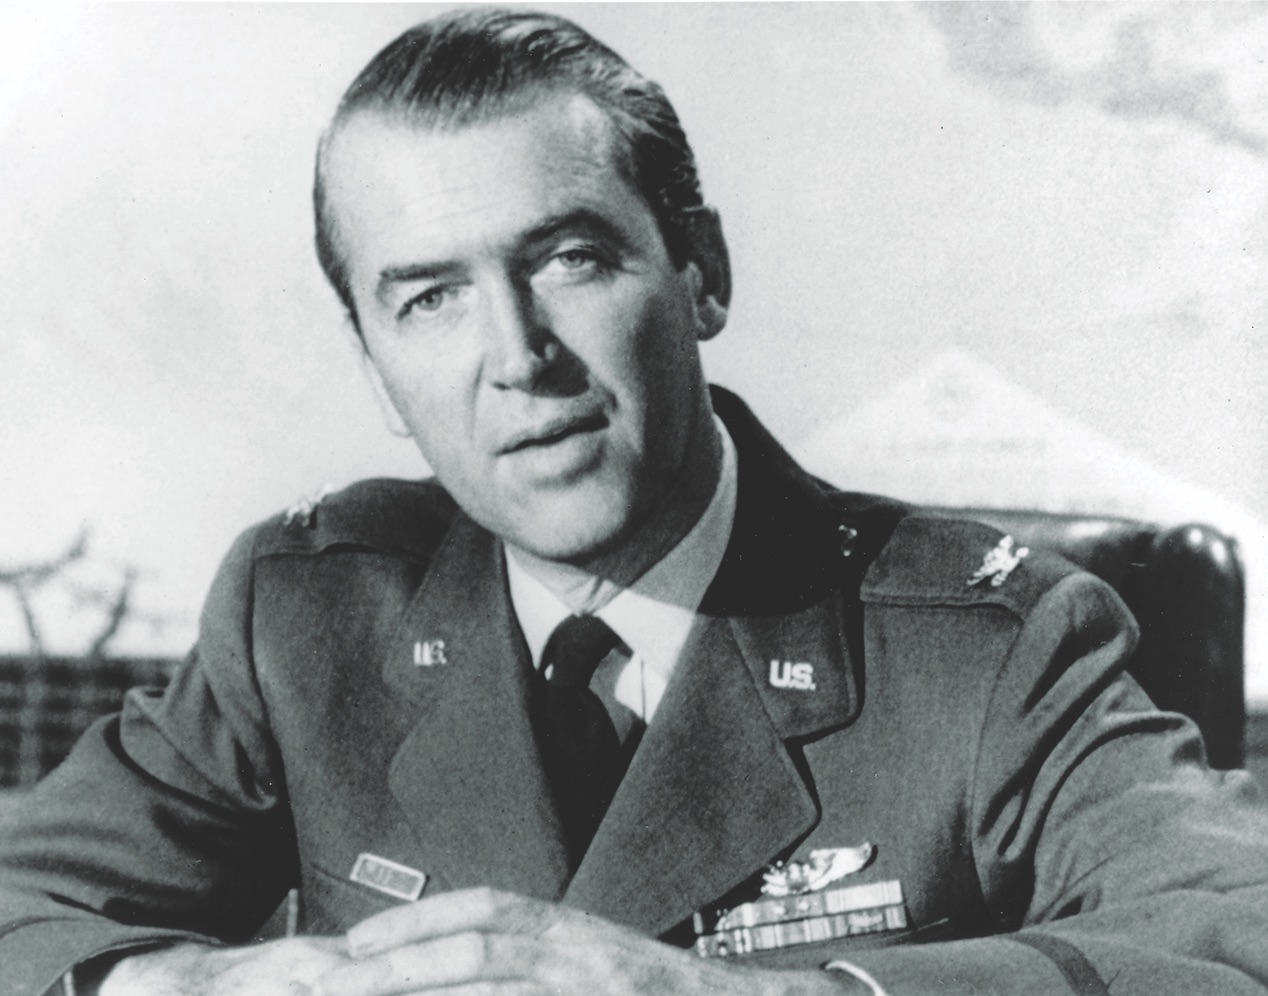 Colonel James Stewart presided over a court-martial stemming from the accidental bombing of Zurich. (U.S. Air Force)